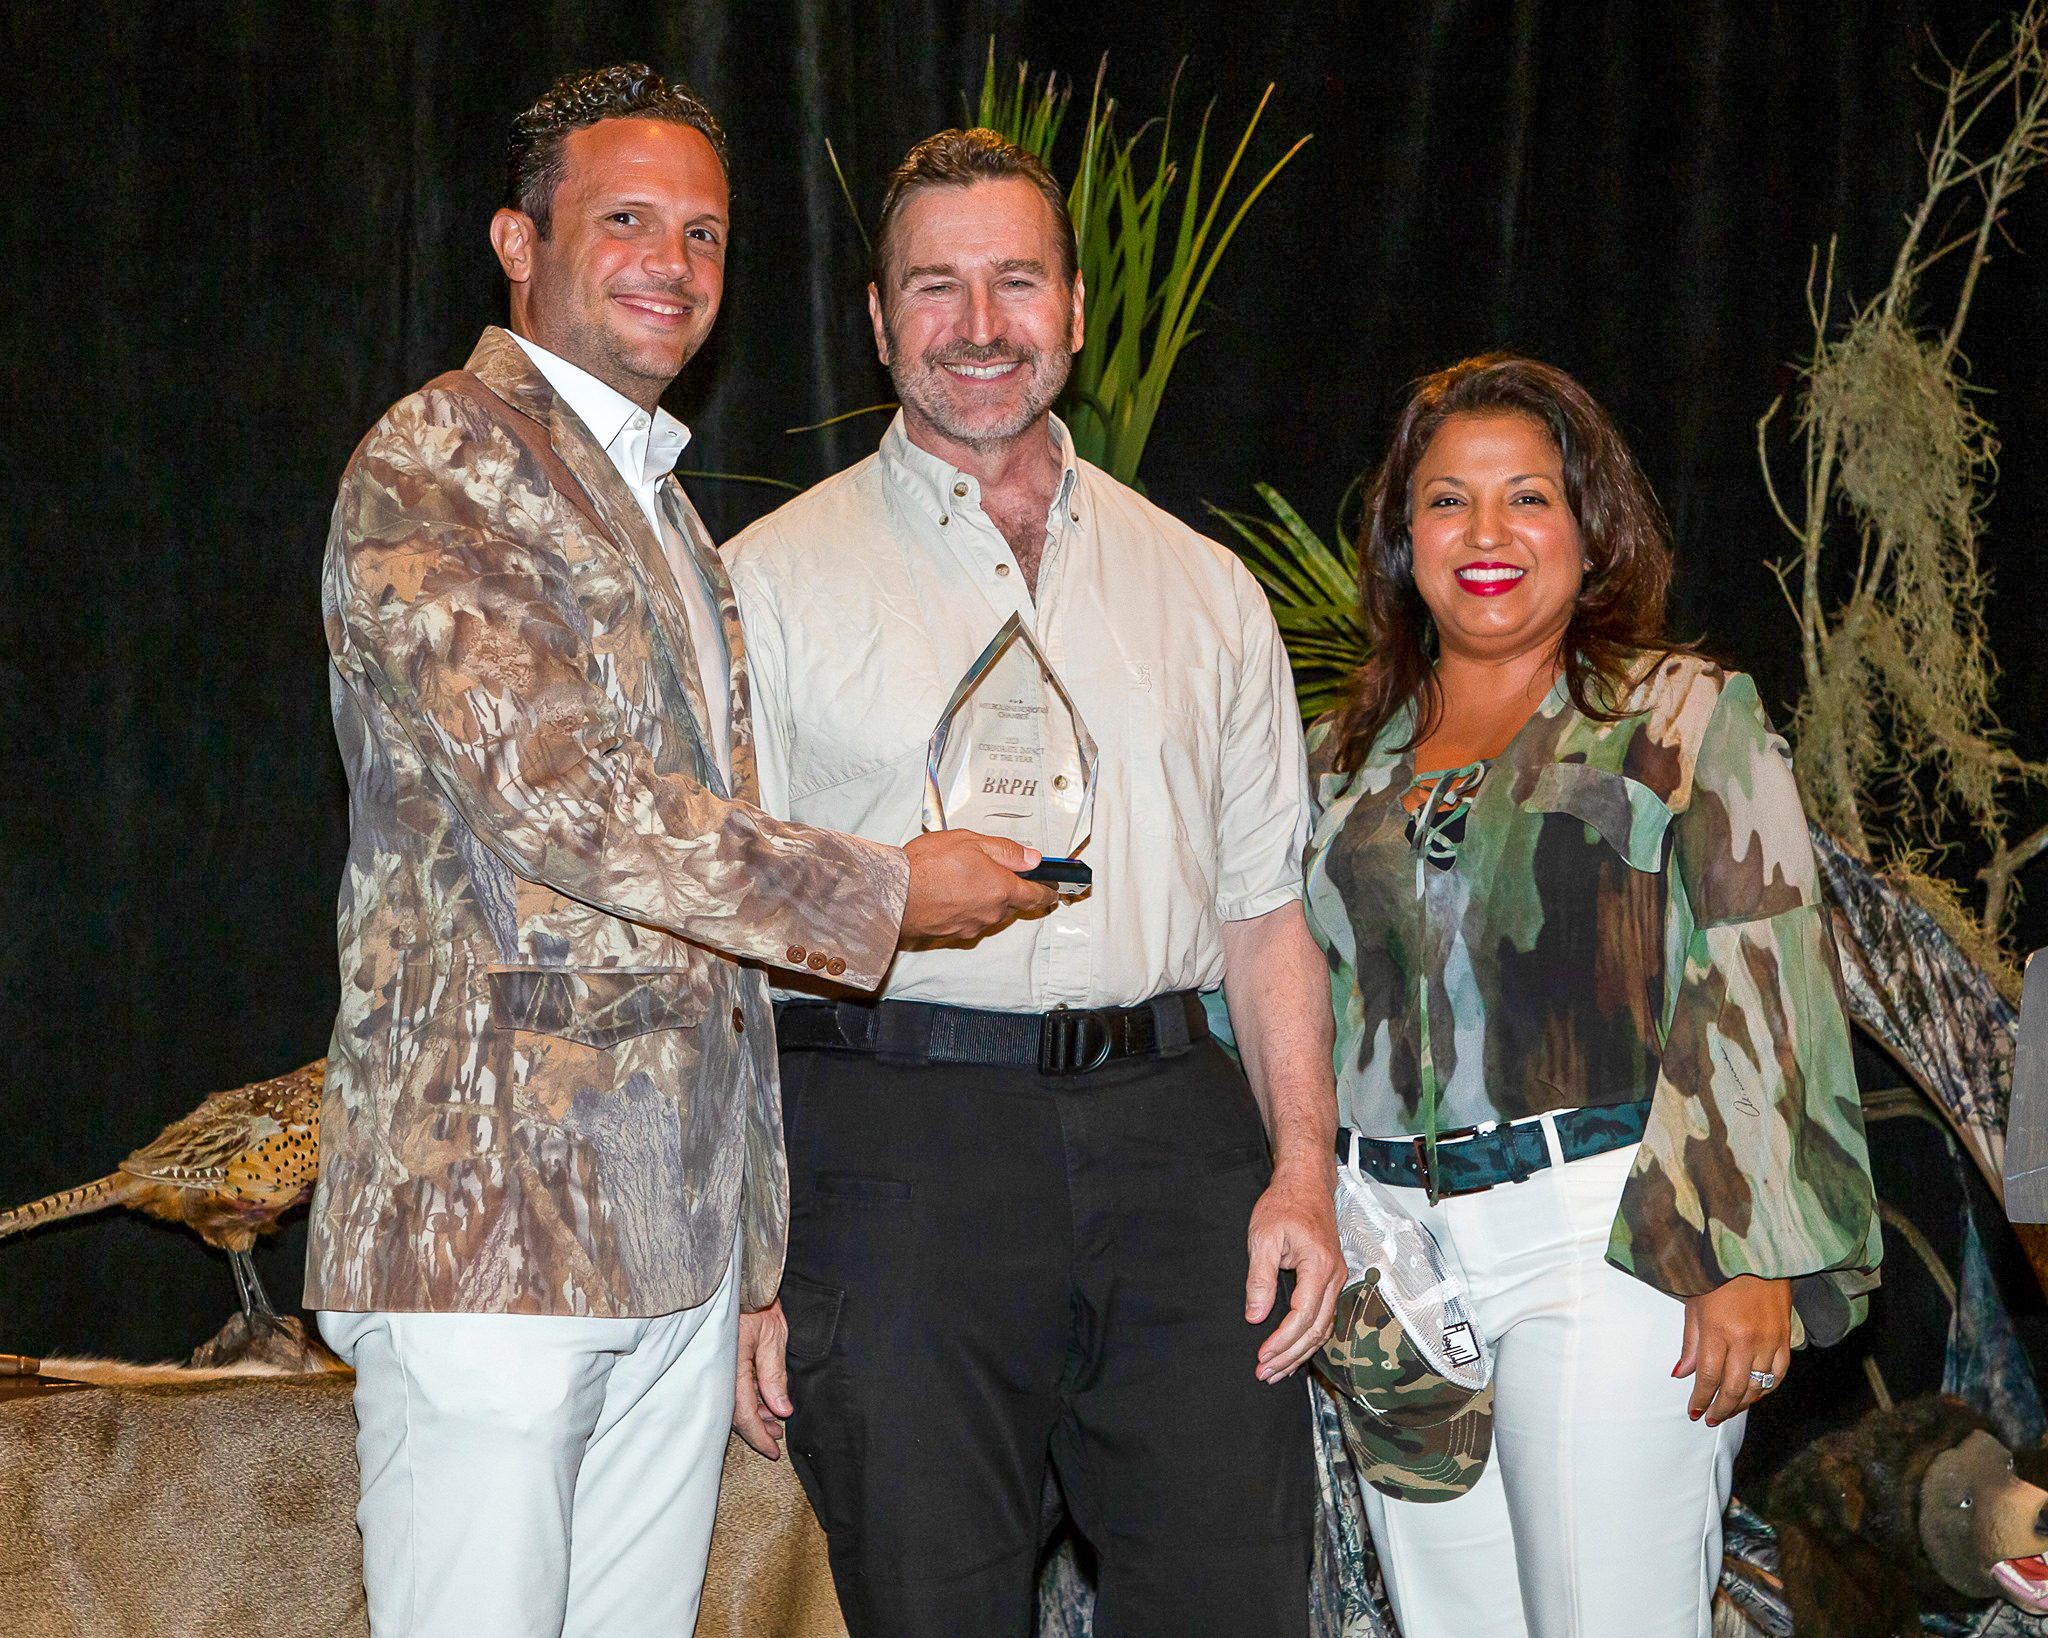 Man in white shirt accepting clear award from man in camo jacket